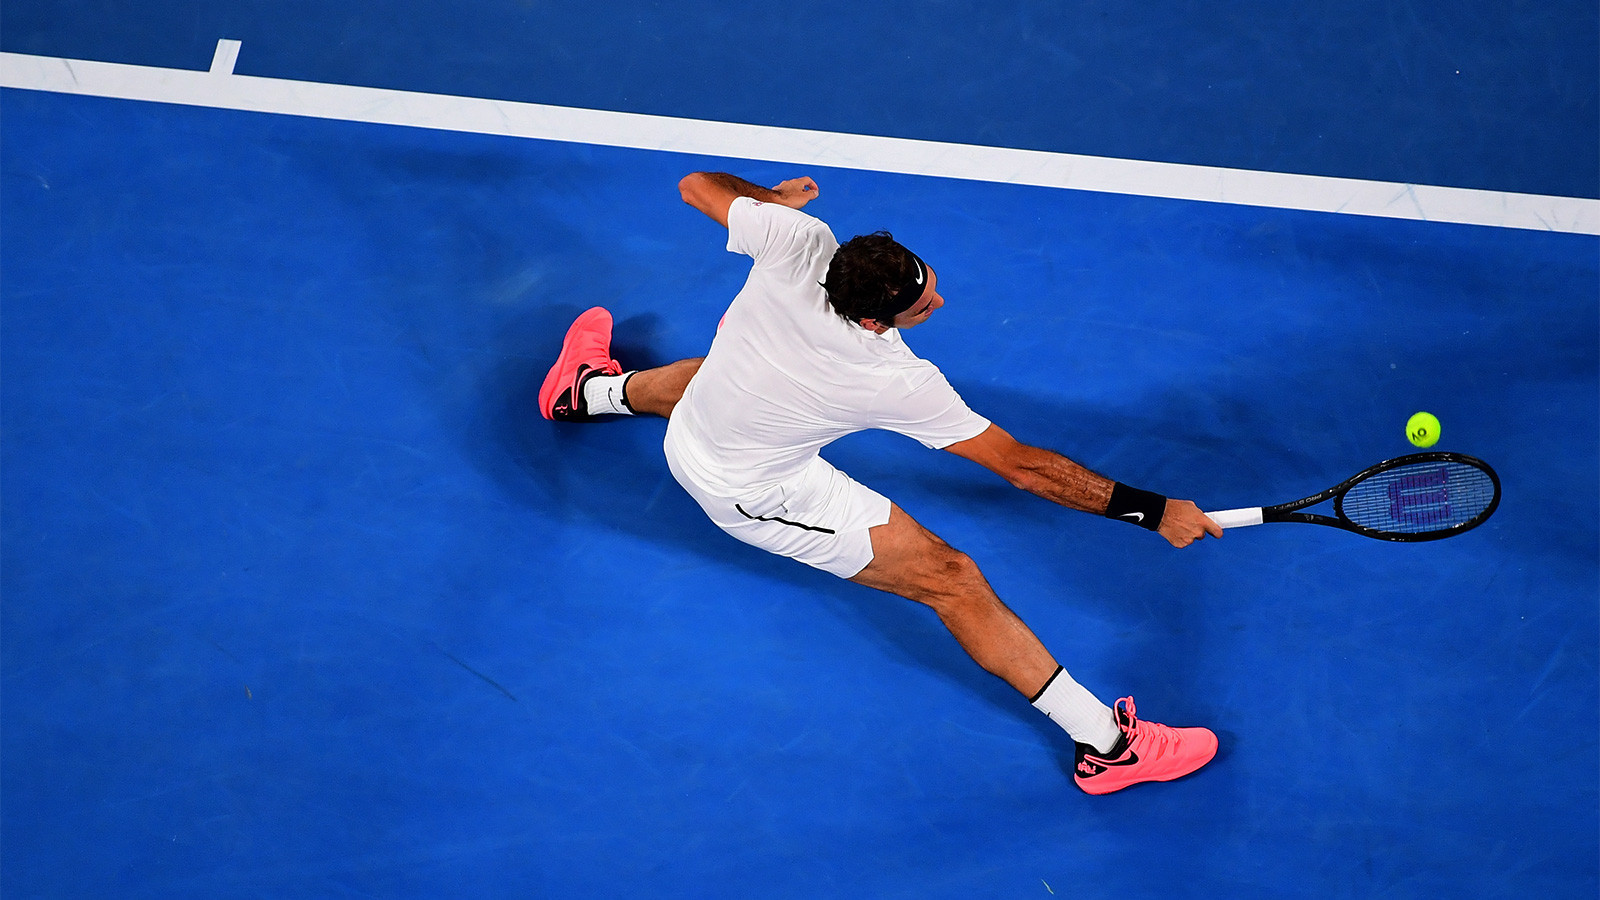 Roger Federer is hoping to win his sixth Australian Open title this year ©Tennis Australia